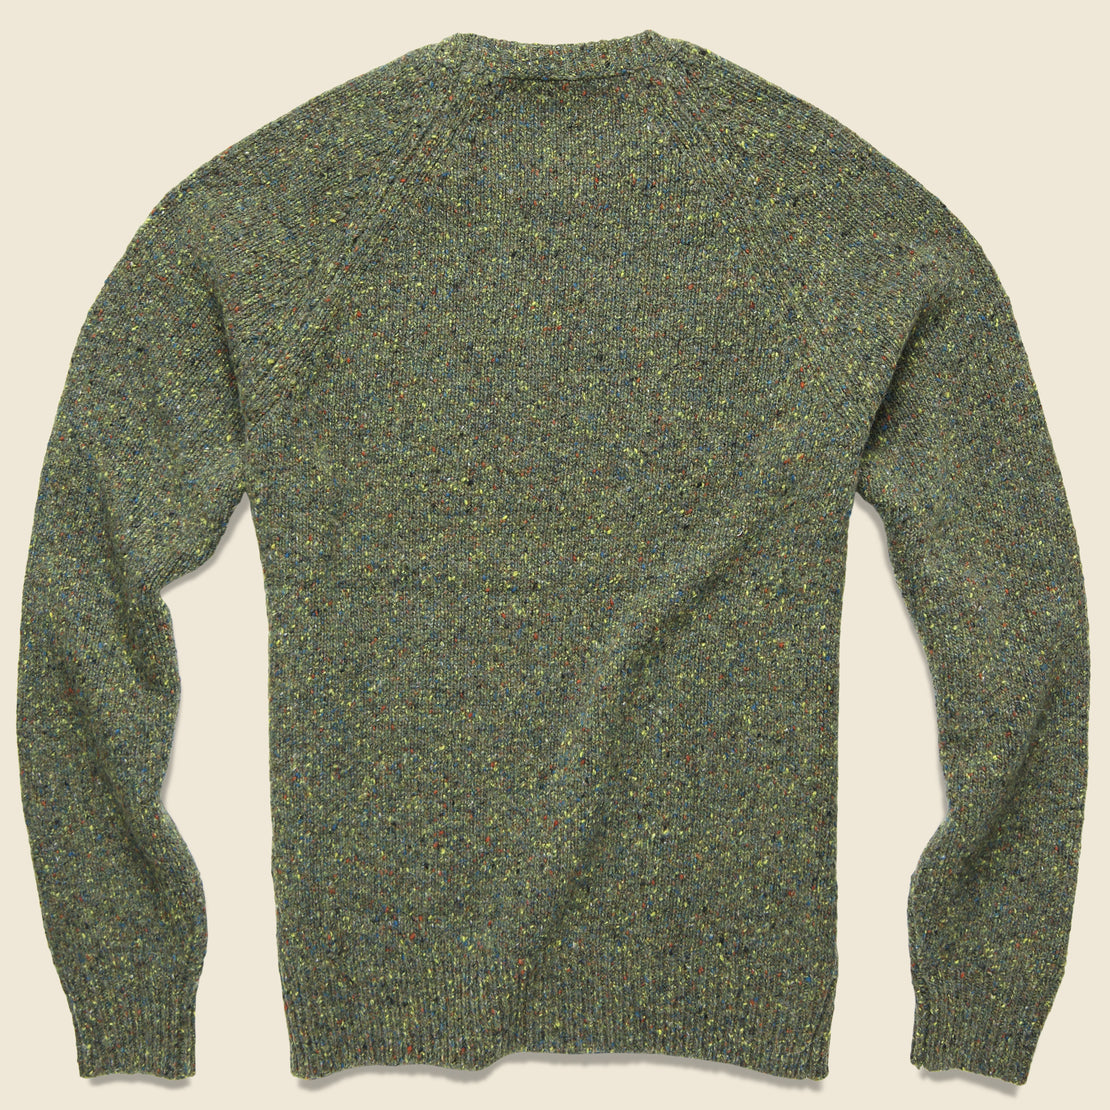 Alpaca Donegal Crew Sweater - Riverbank Green - Alex Mill - STAG Provisions - Tops - Sweater